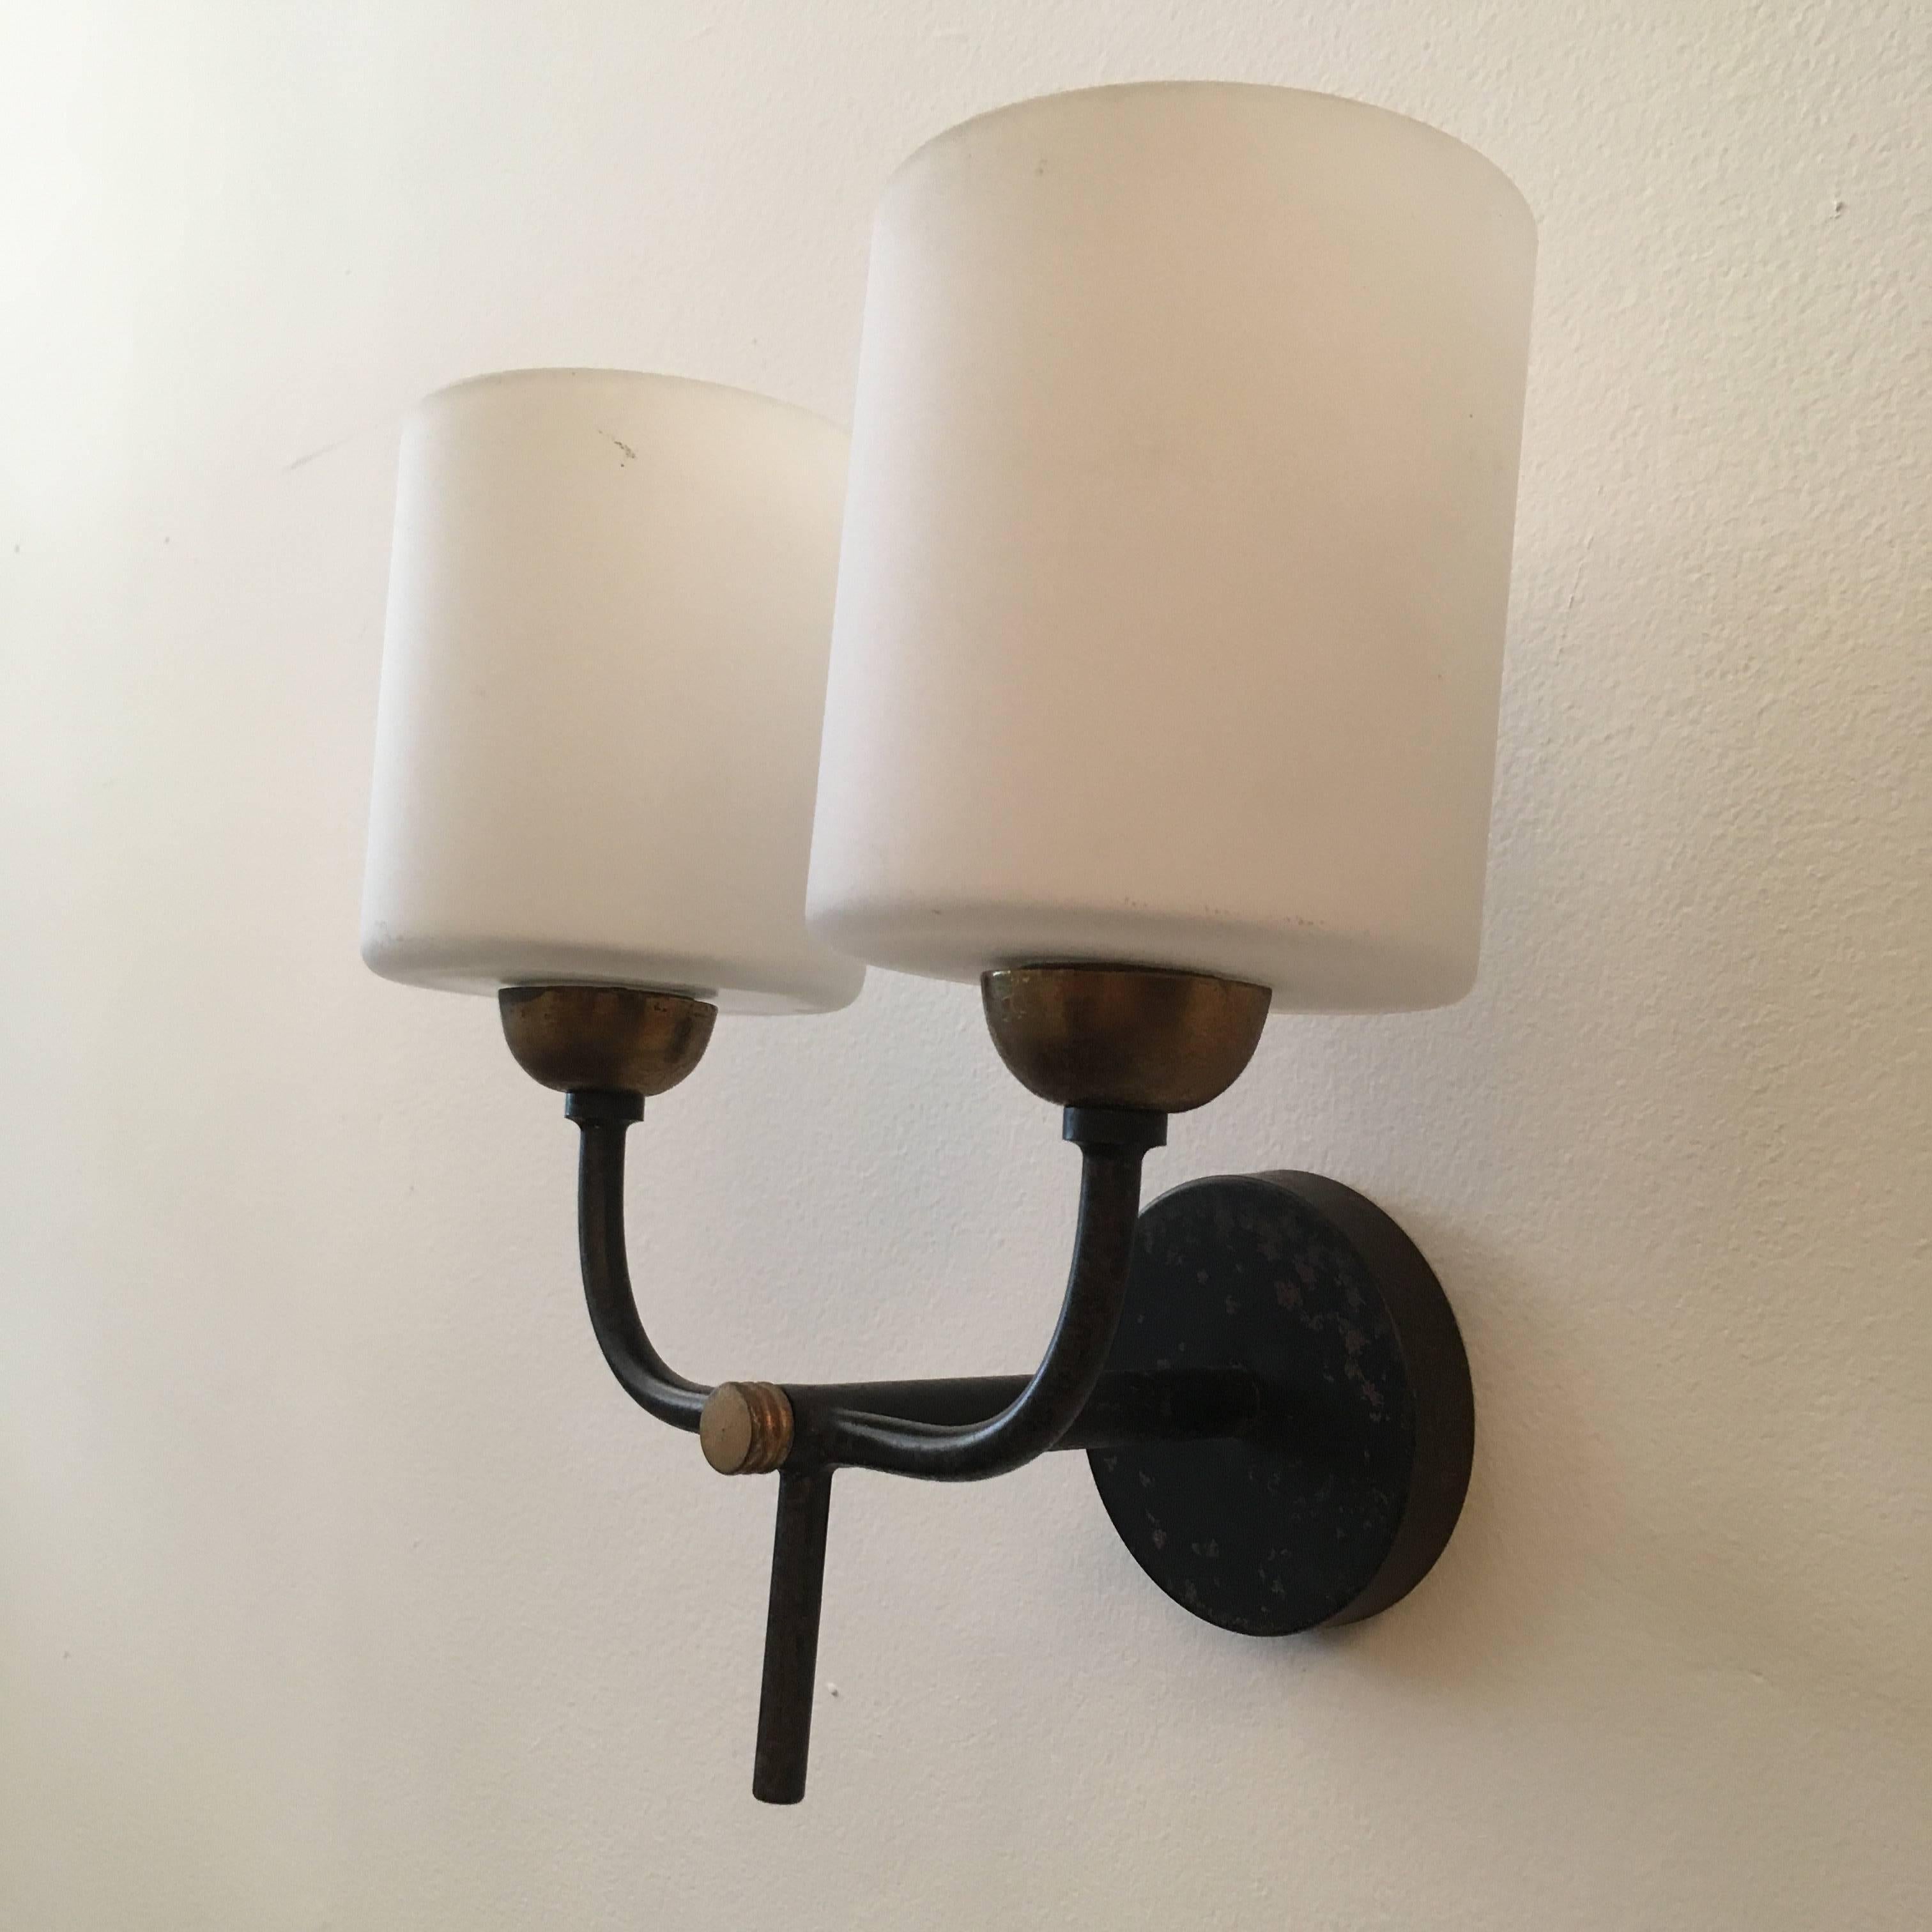 An original pair of French, 1960s sconces by Arlus. The wall lights are composed of black enamel and aged brass with white glass shades. Rewired.